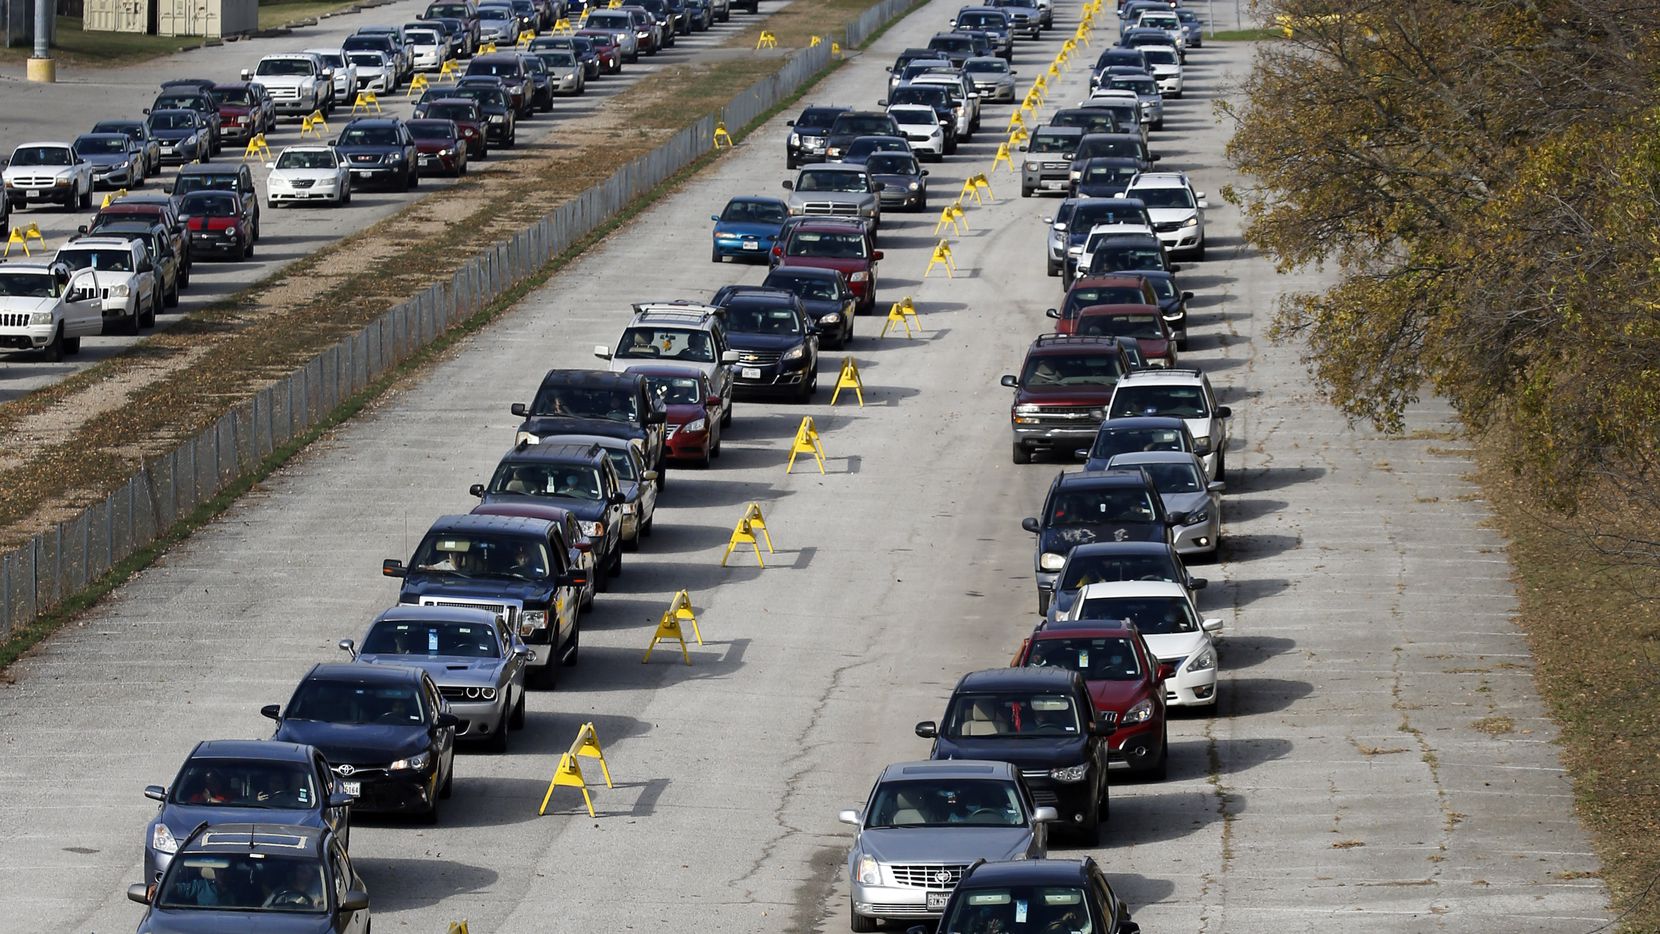 Thousands of vehicles lined up for food at Fair Park in Dallas on Nov. 14. Over half a...